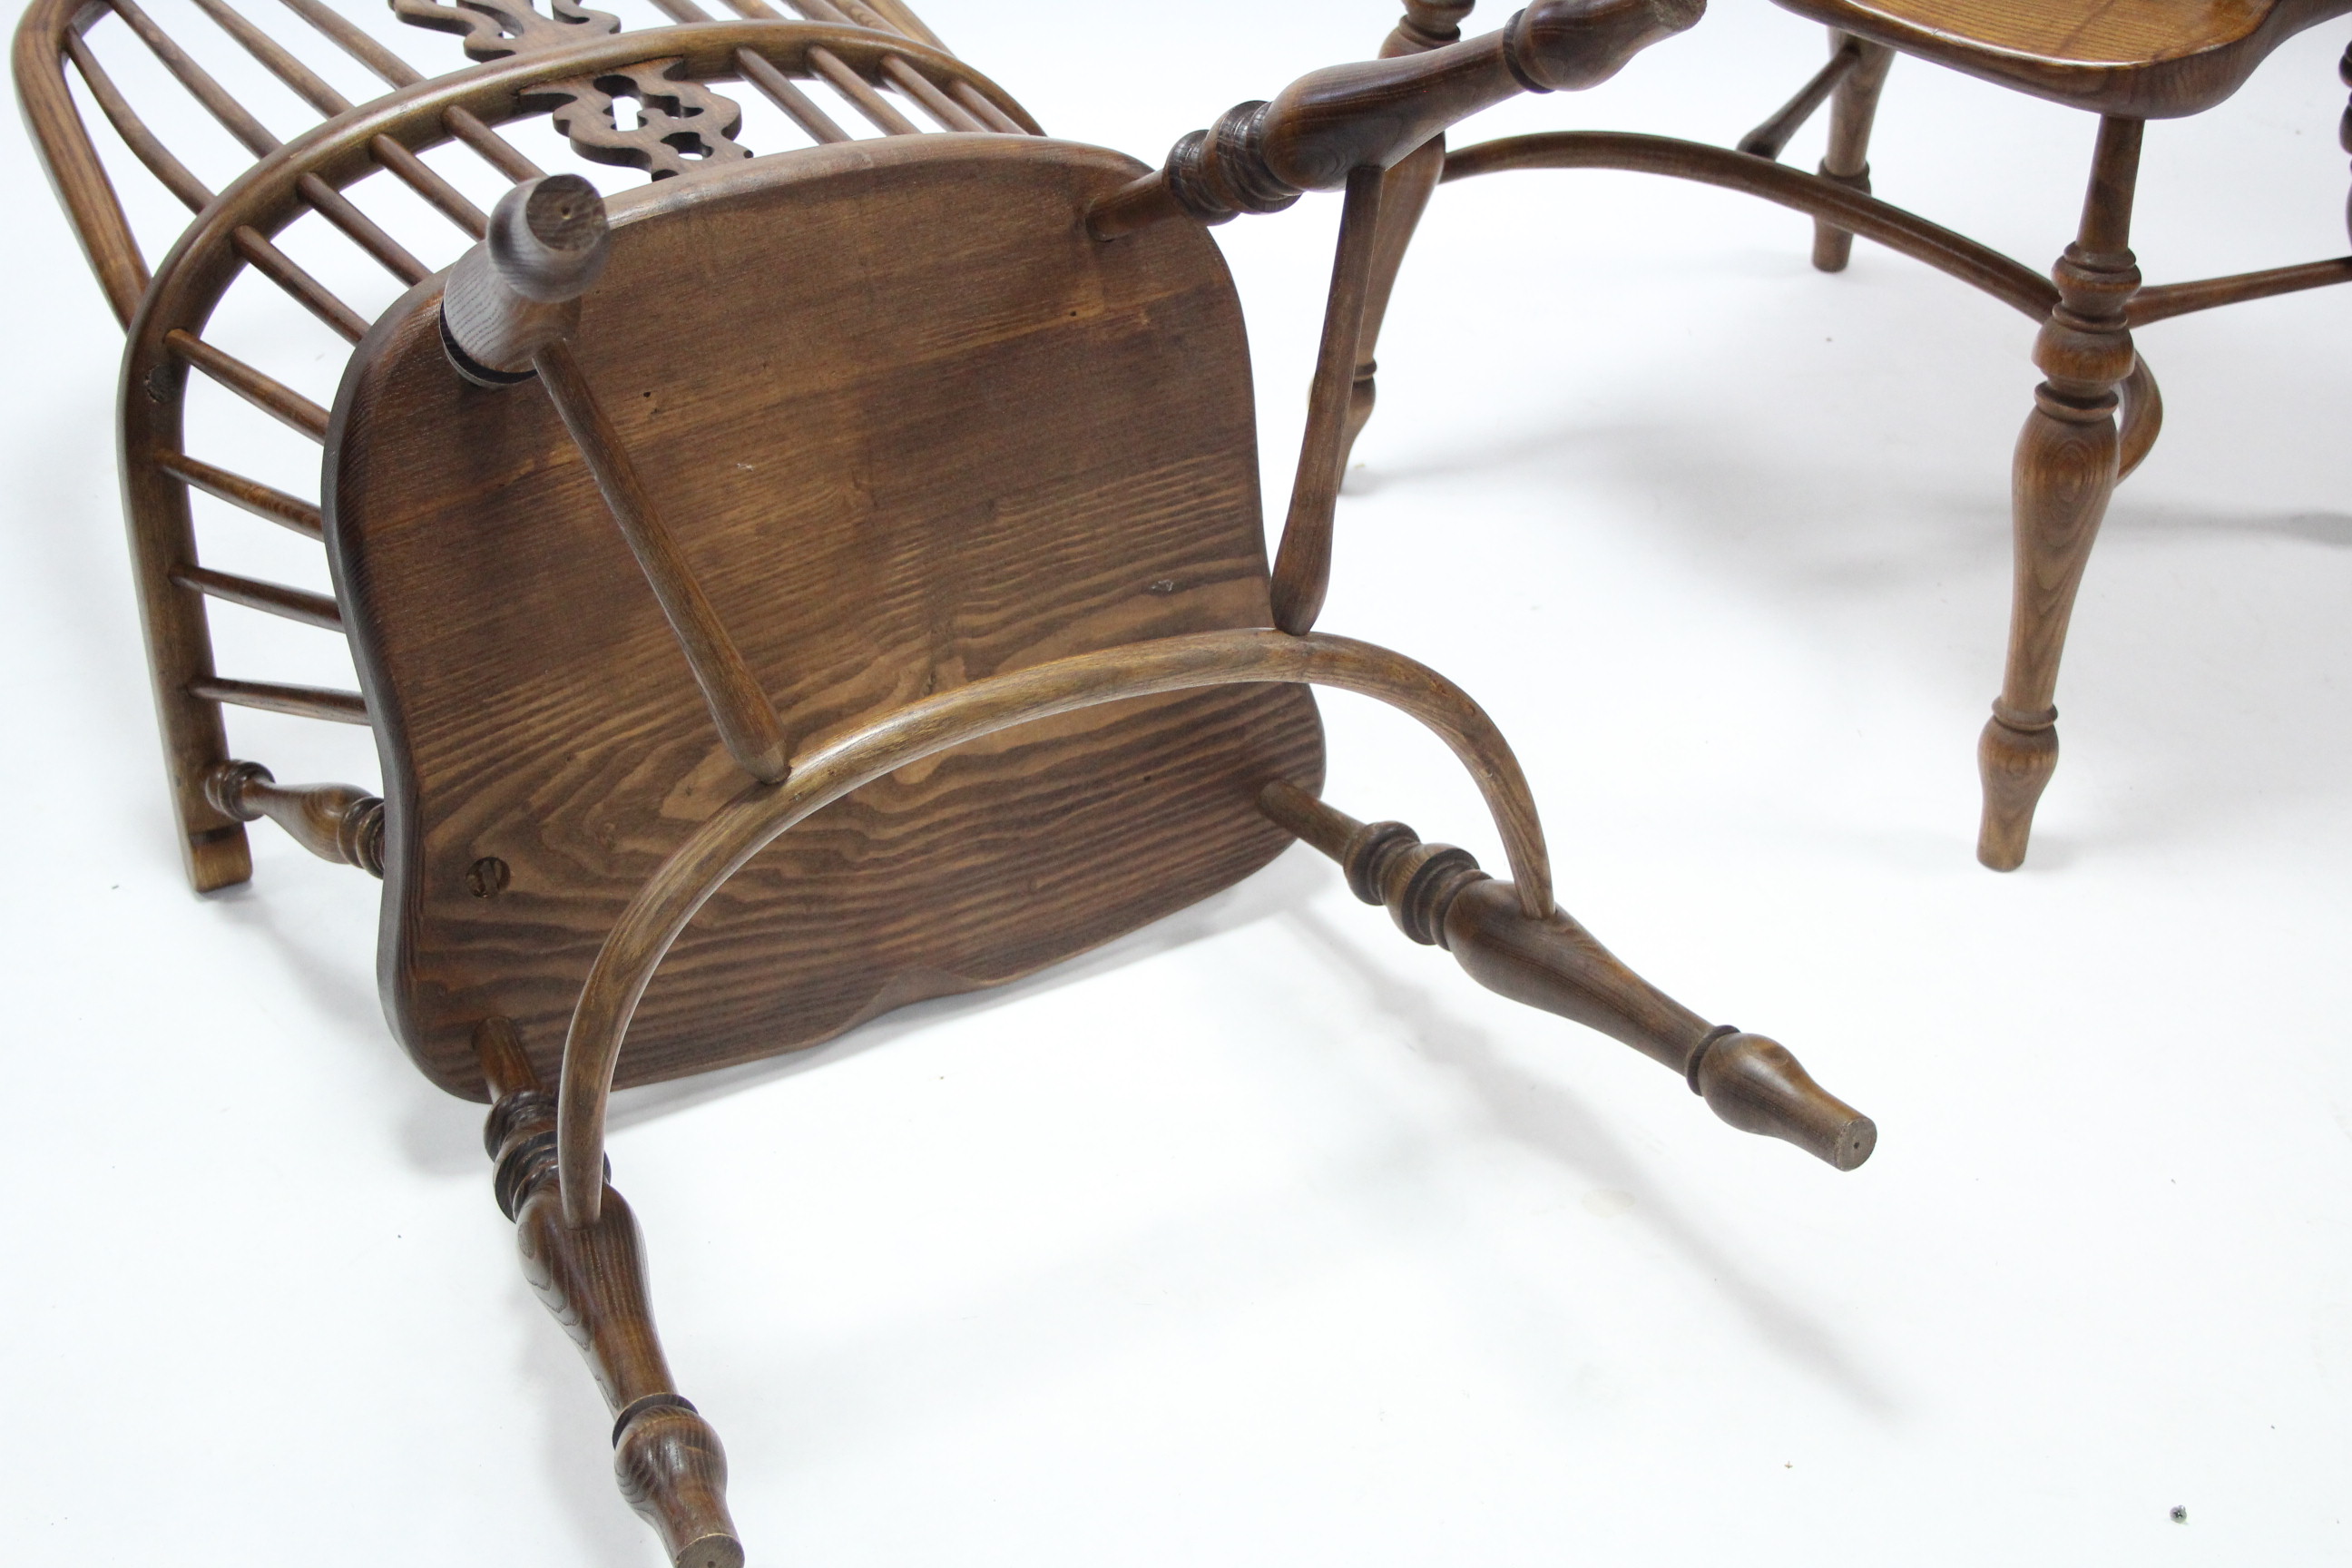 GOOD QUALITY SET OF SIX 19th CENTURY WINDSOR-STYLE DINING CHAIRS (including a pair of carvers), with - Image 6 of 7